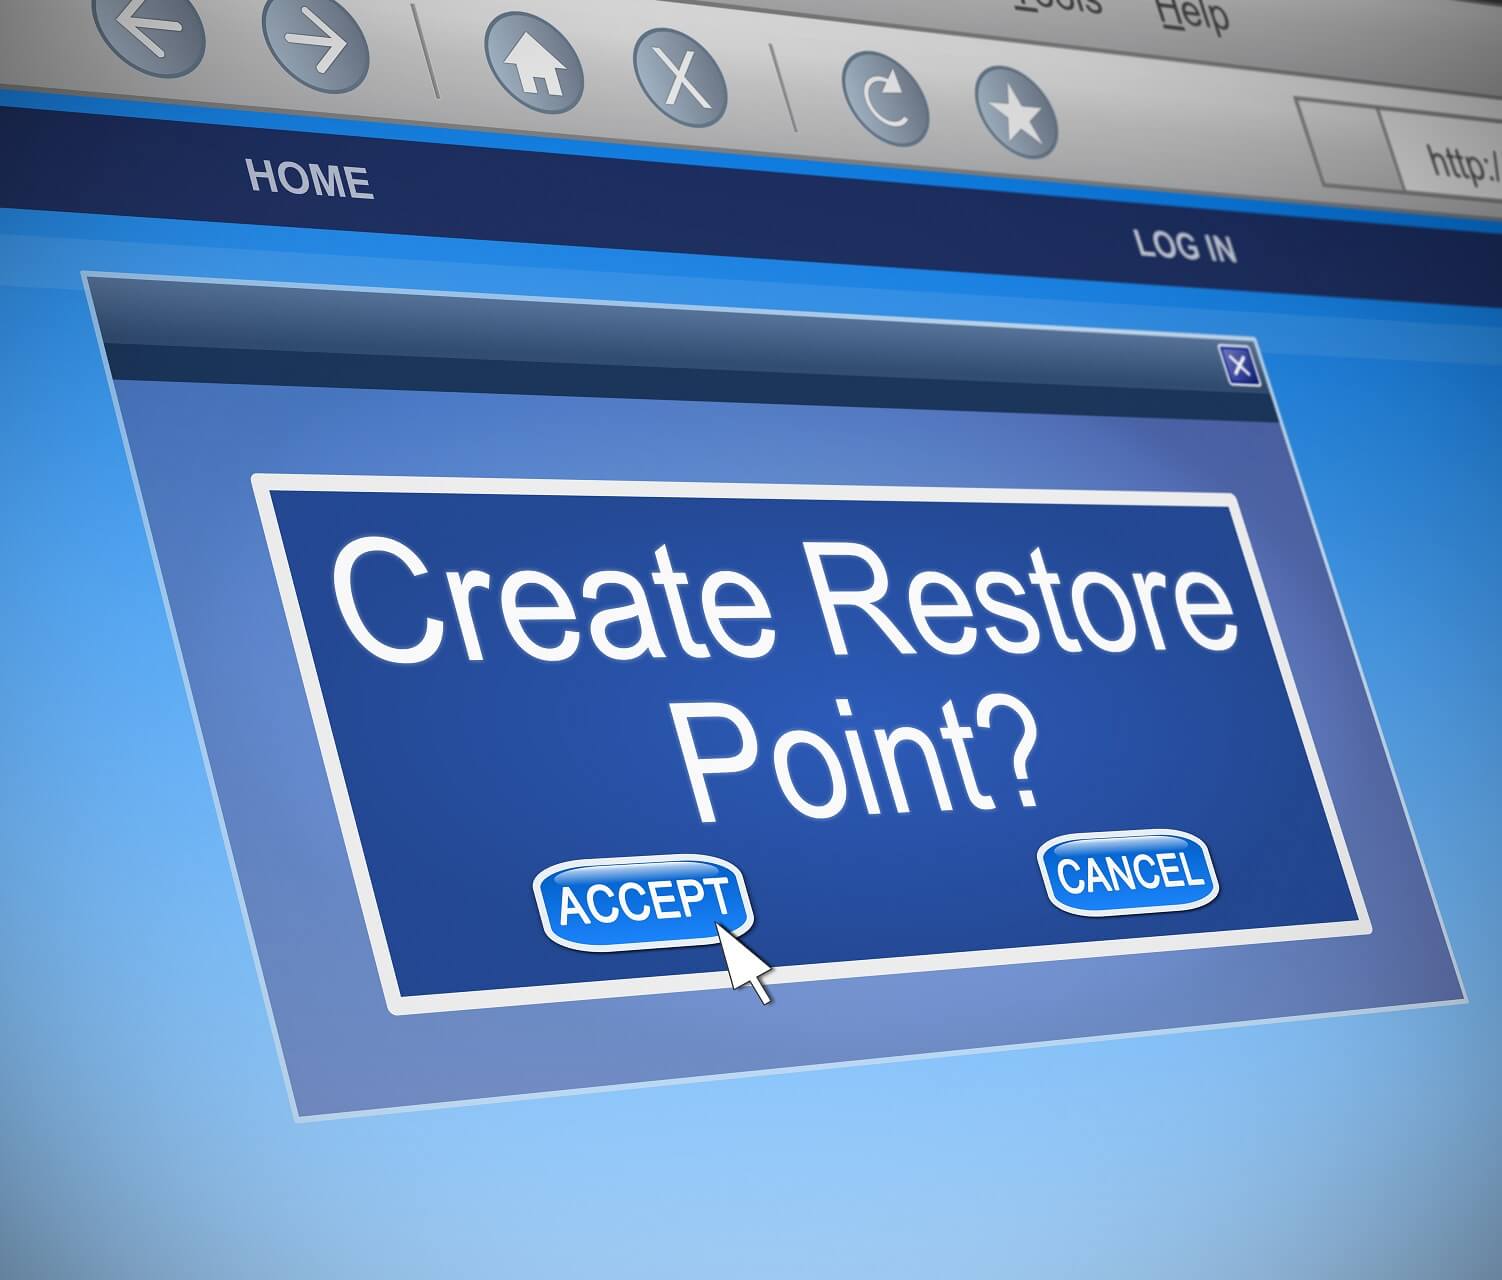 How can I create a System Restore Point in Windows 10